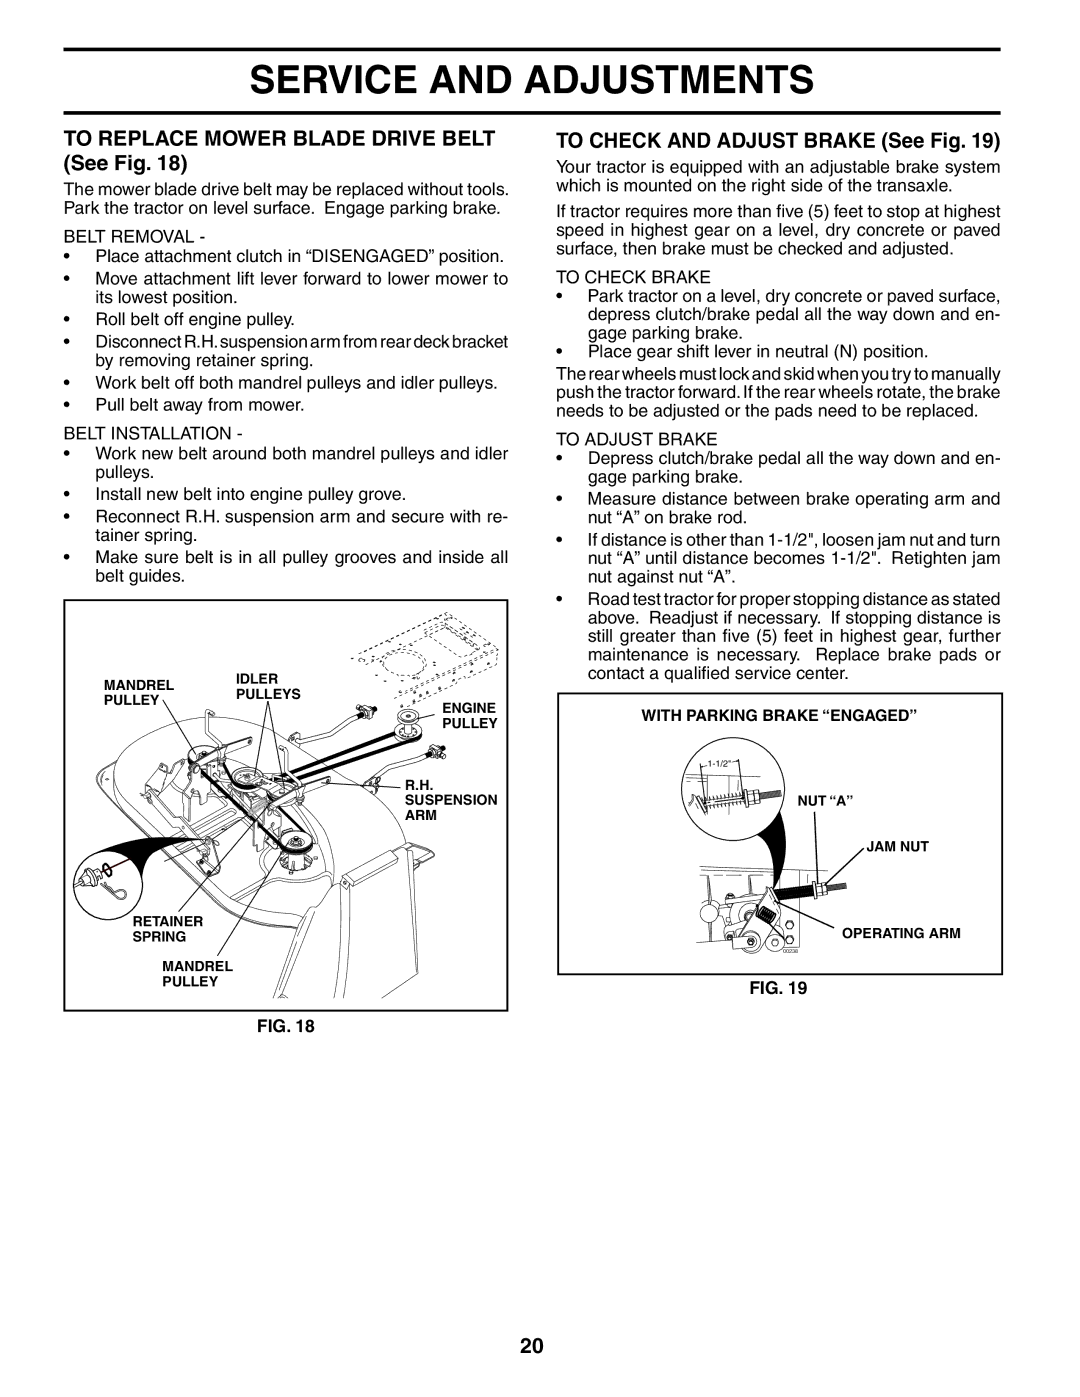 Poulan 187007 manual To Replace Mower Blade Drive Belt See Fig, To Check and Adjust Brake See Fig 